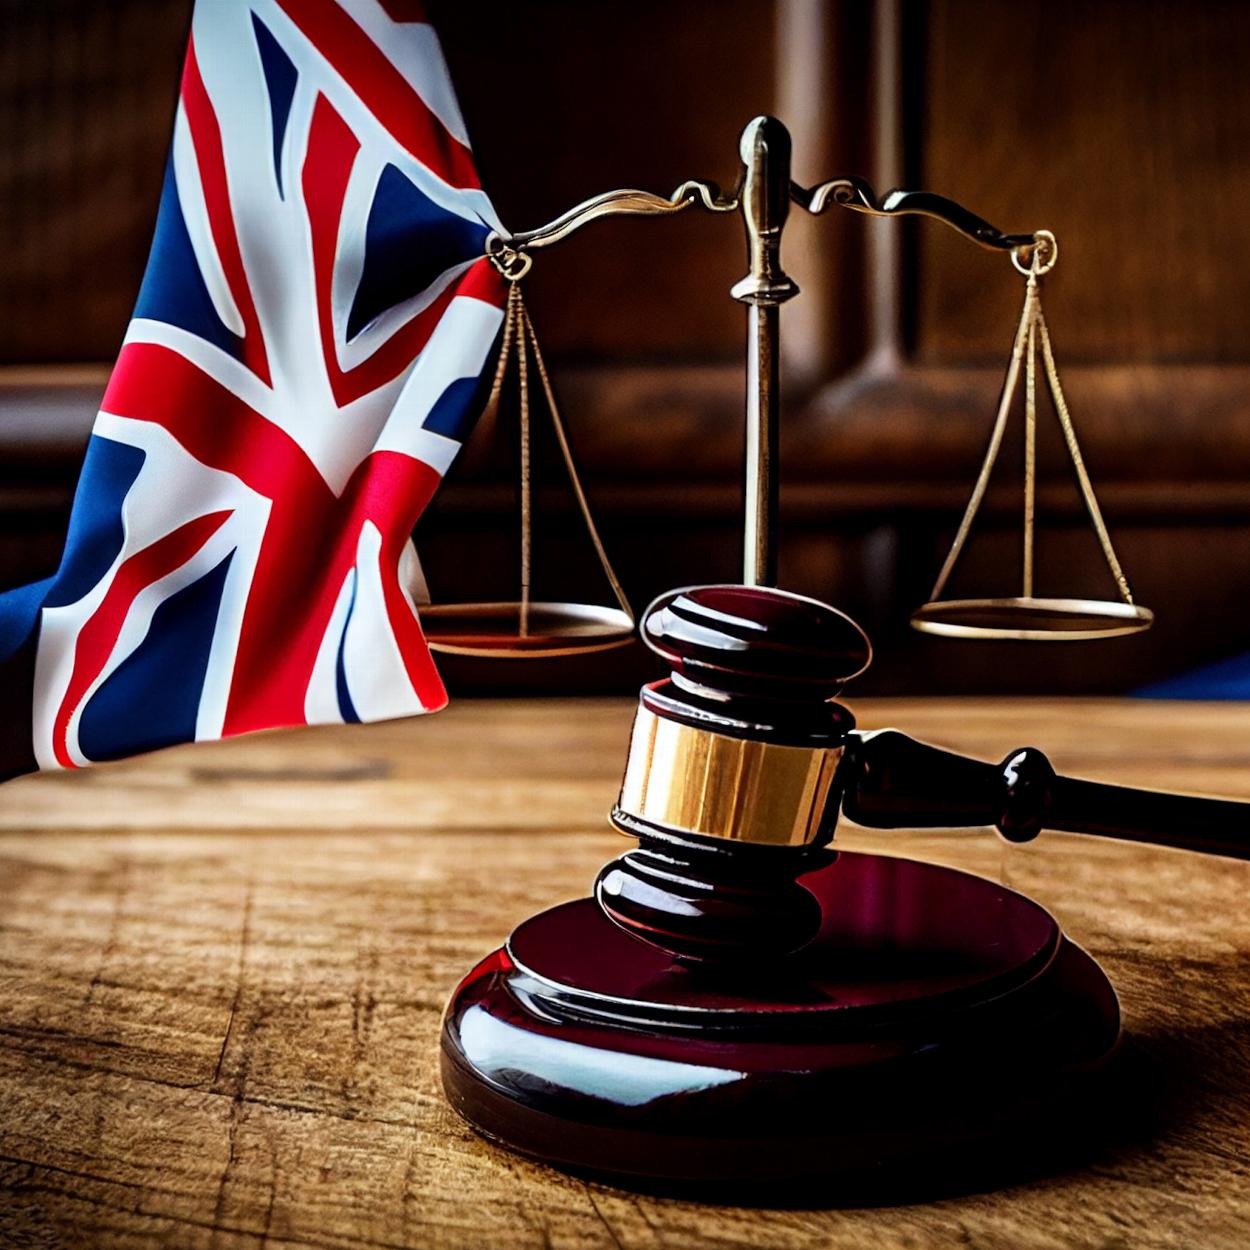 Gavel and scales in front of British flag